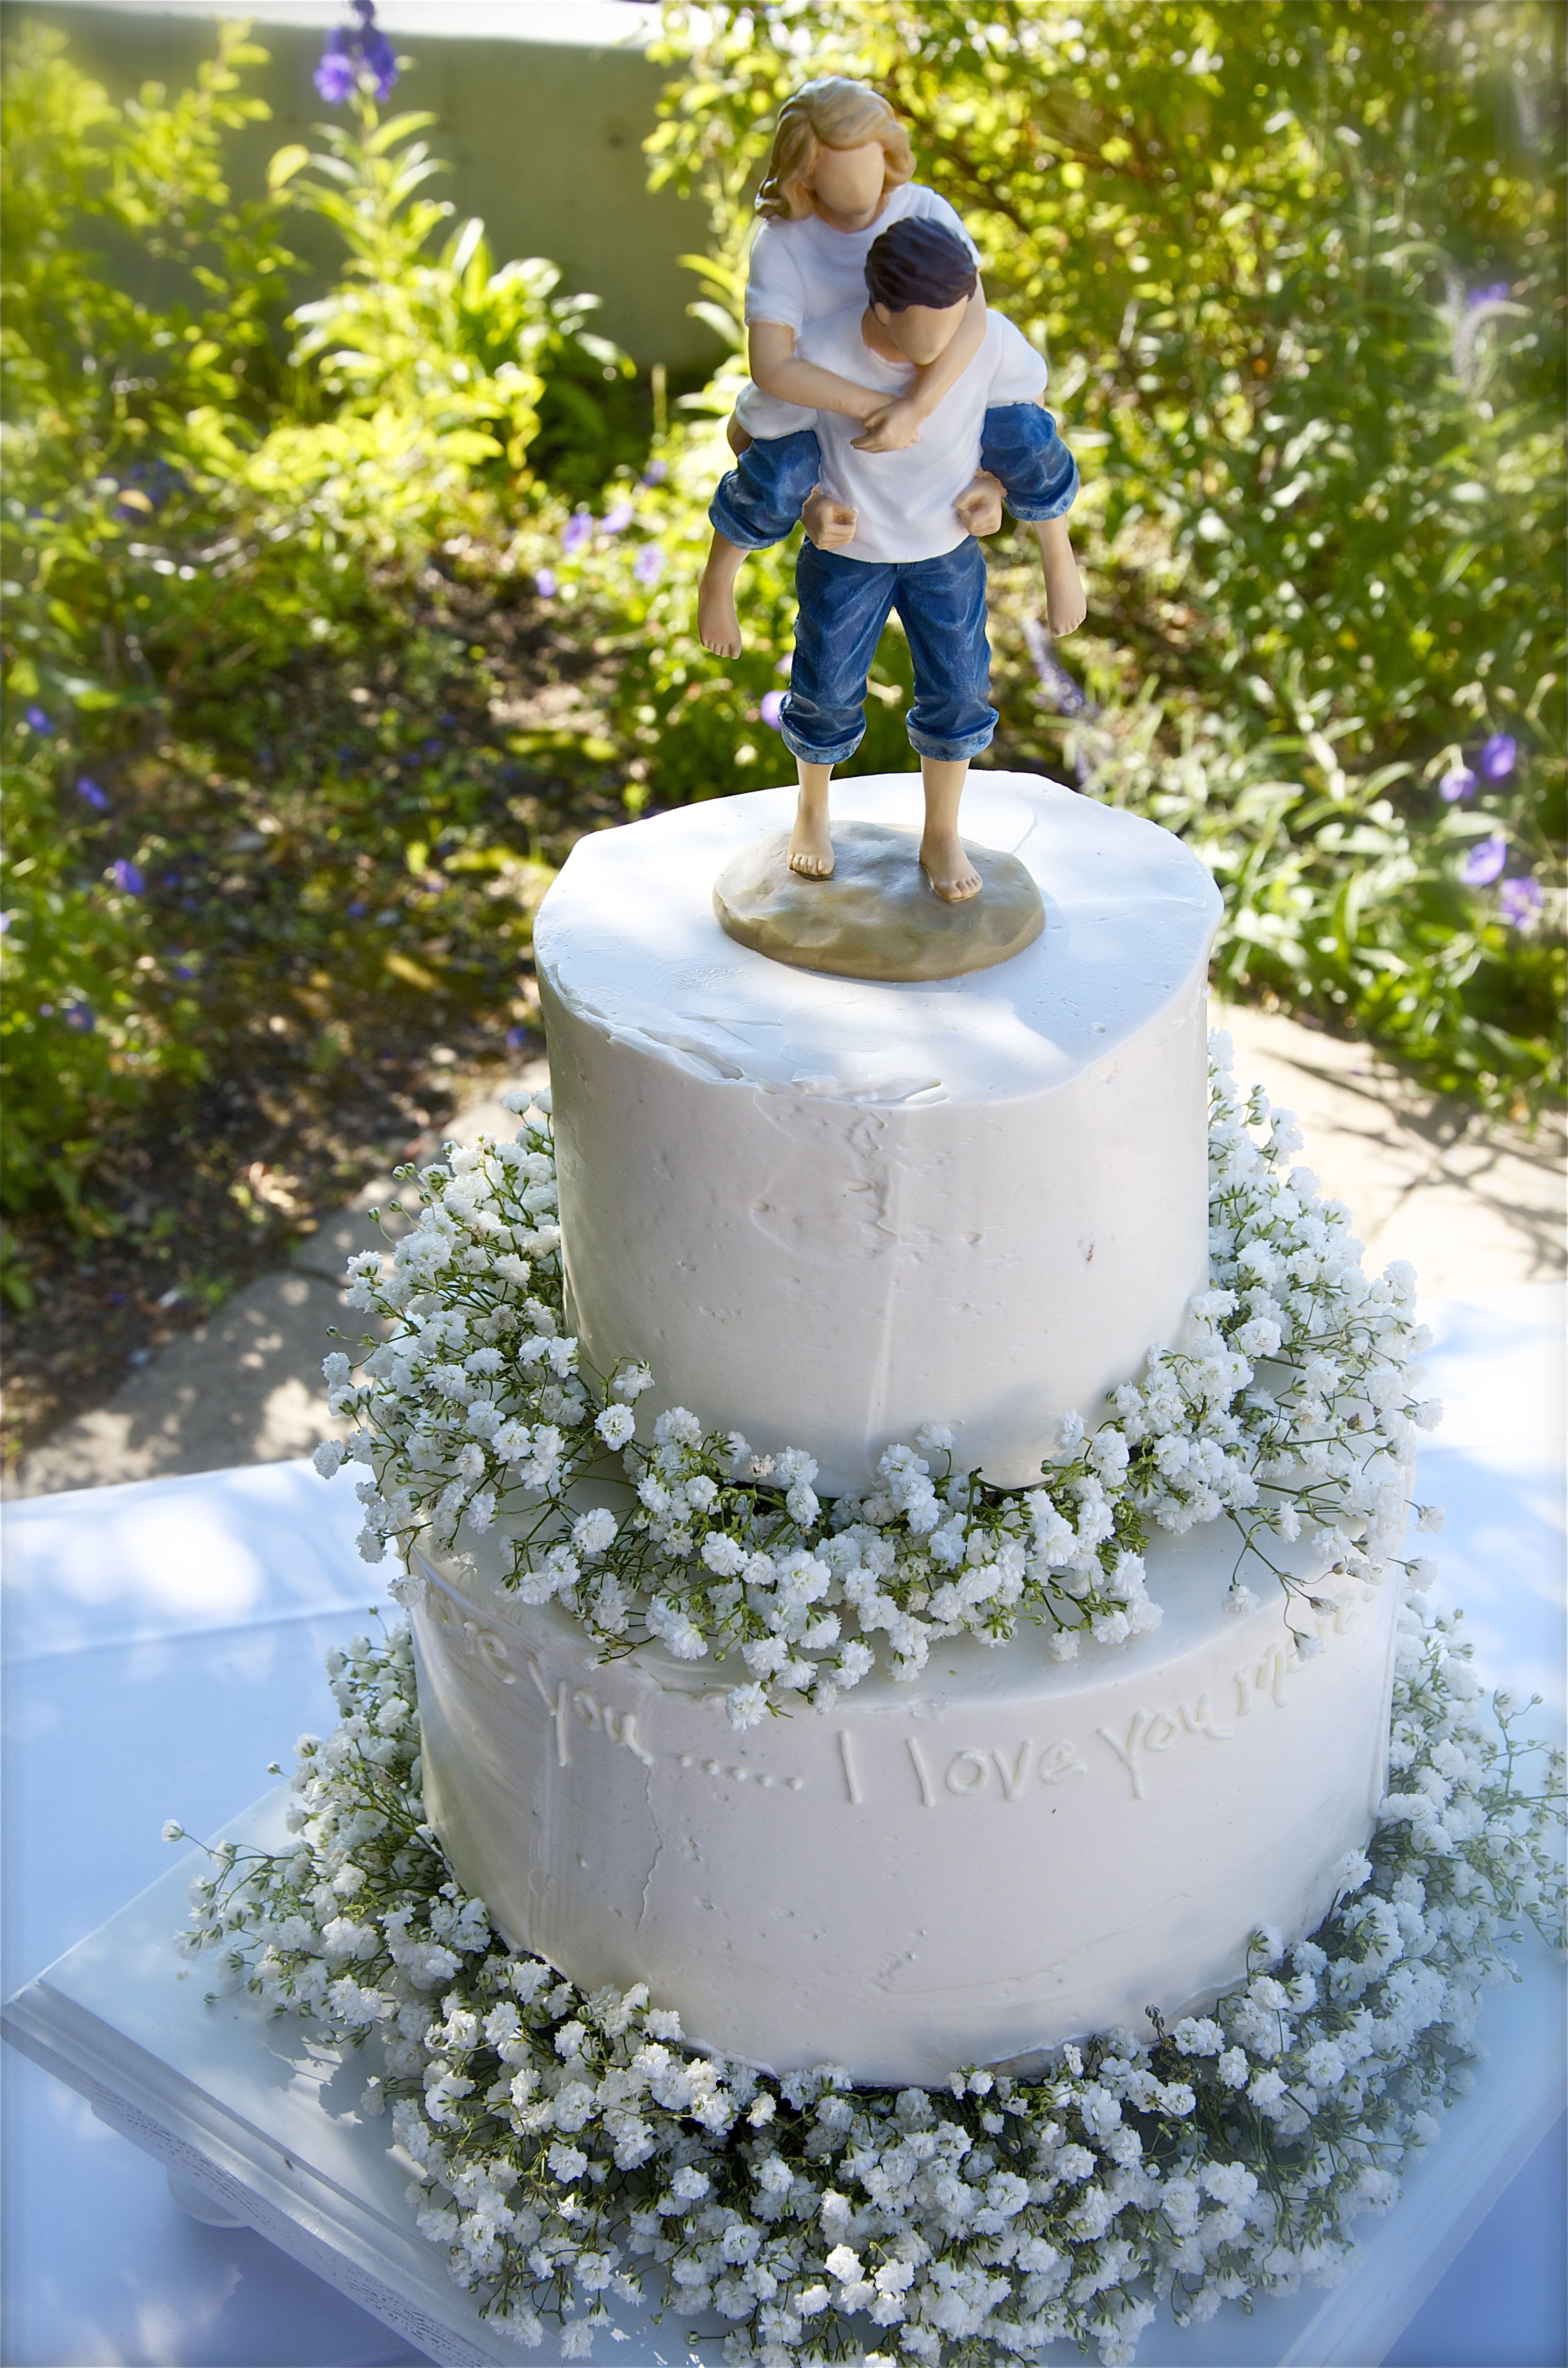 Wedding Cakes Idaho Falls
 Wedding cake by Stacy Cakes in McCall Idaho It was